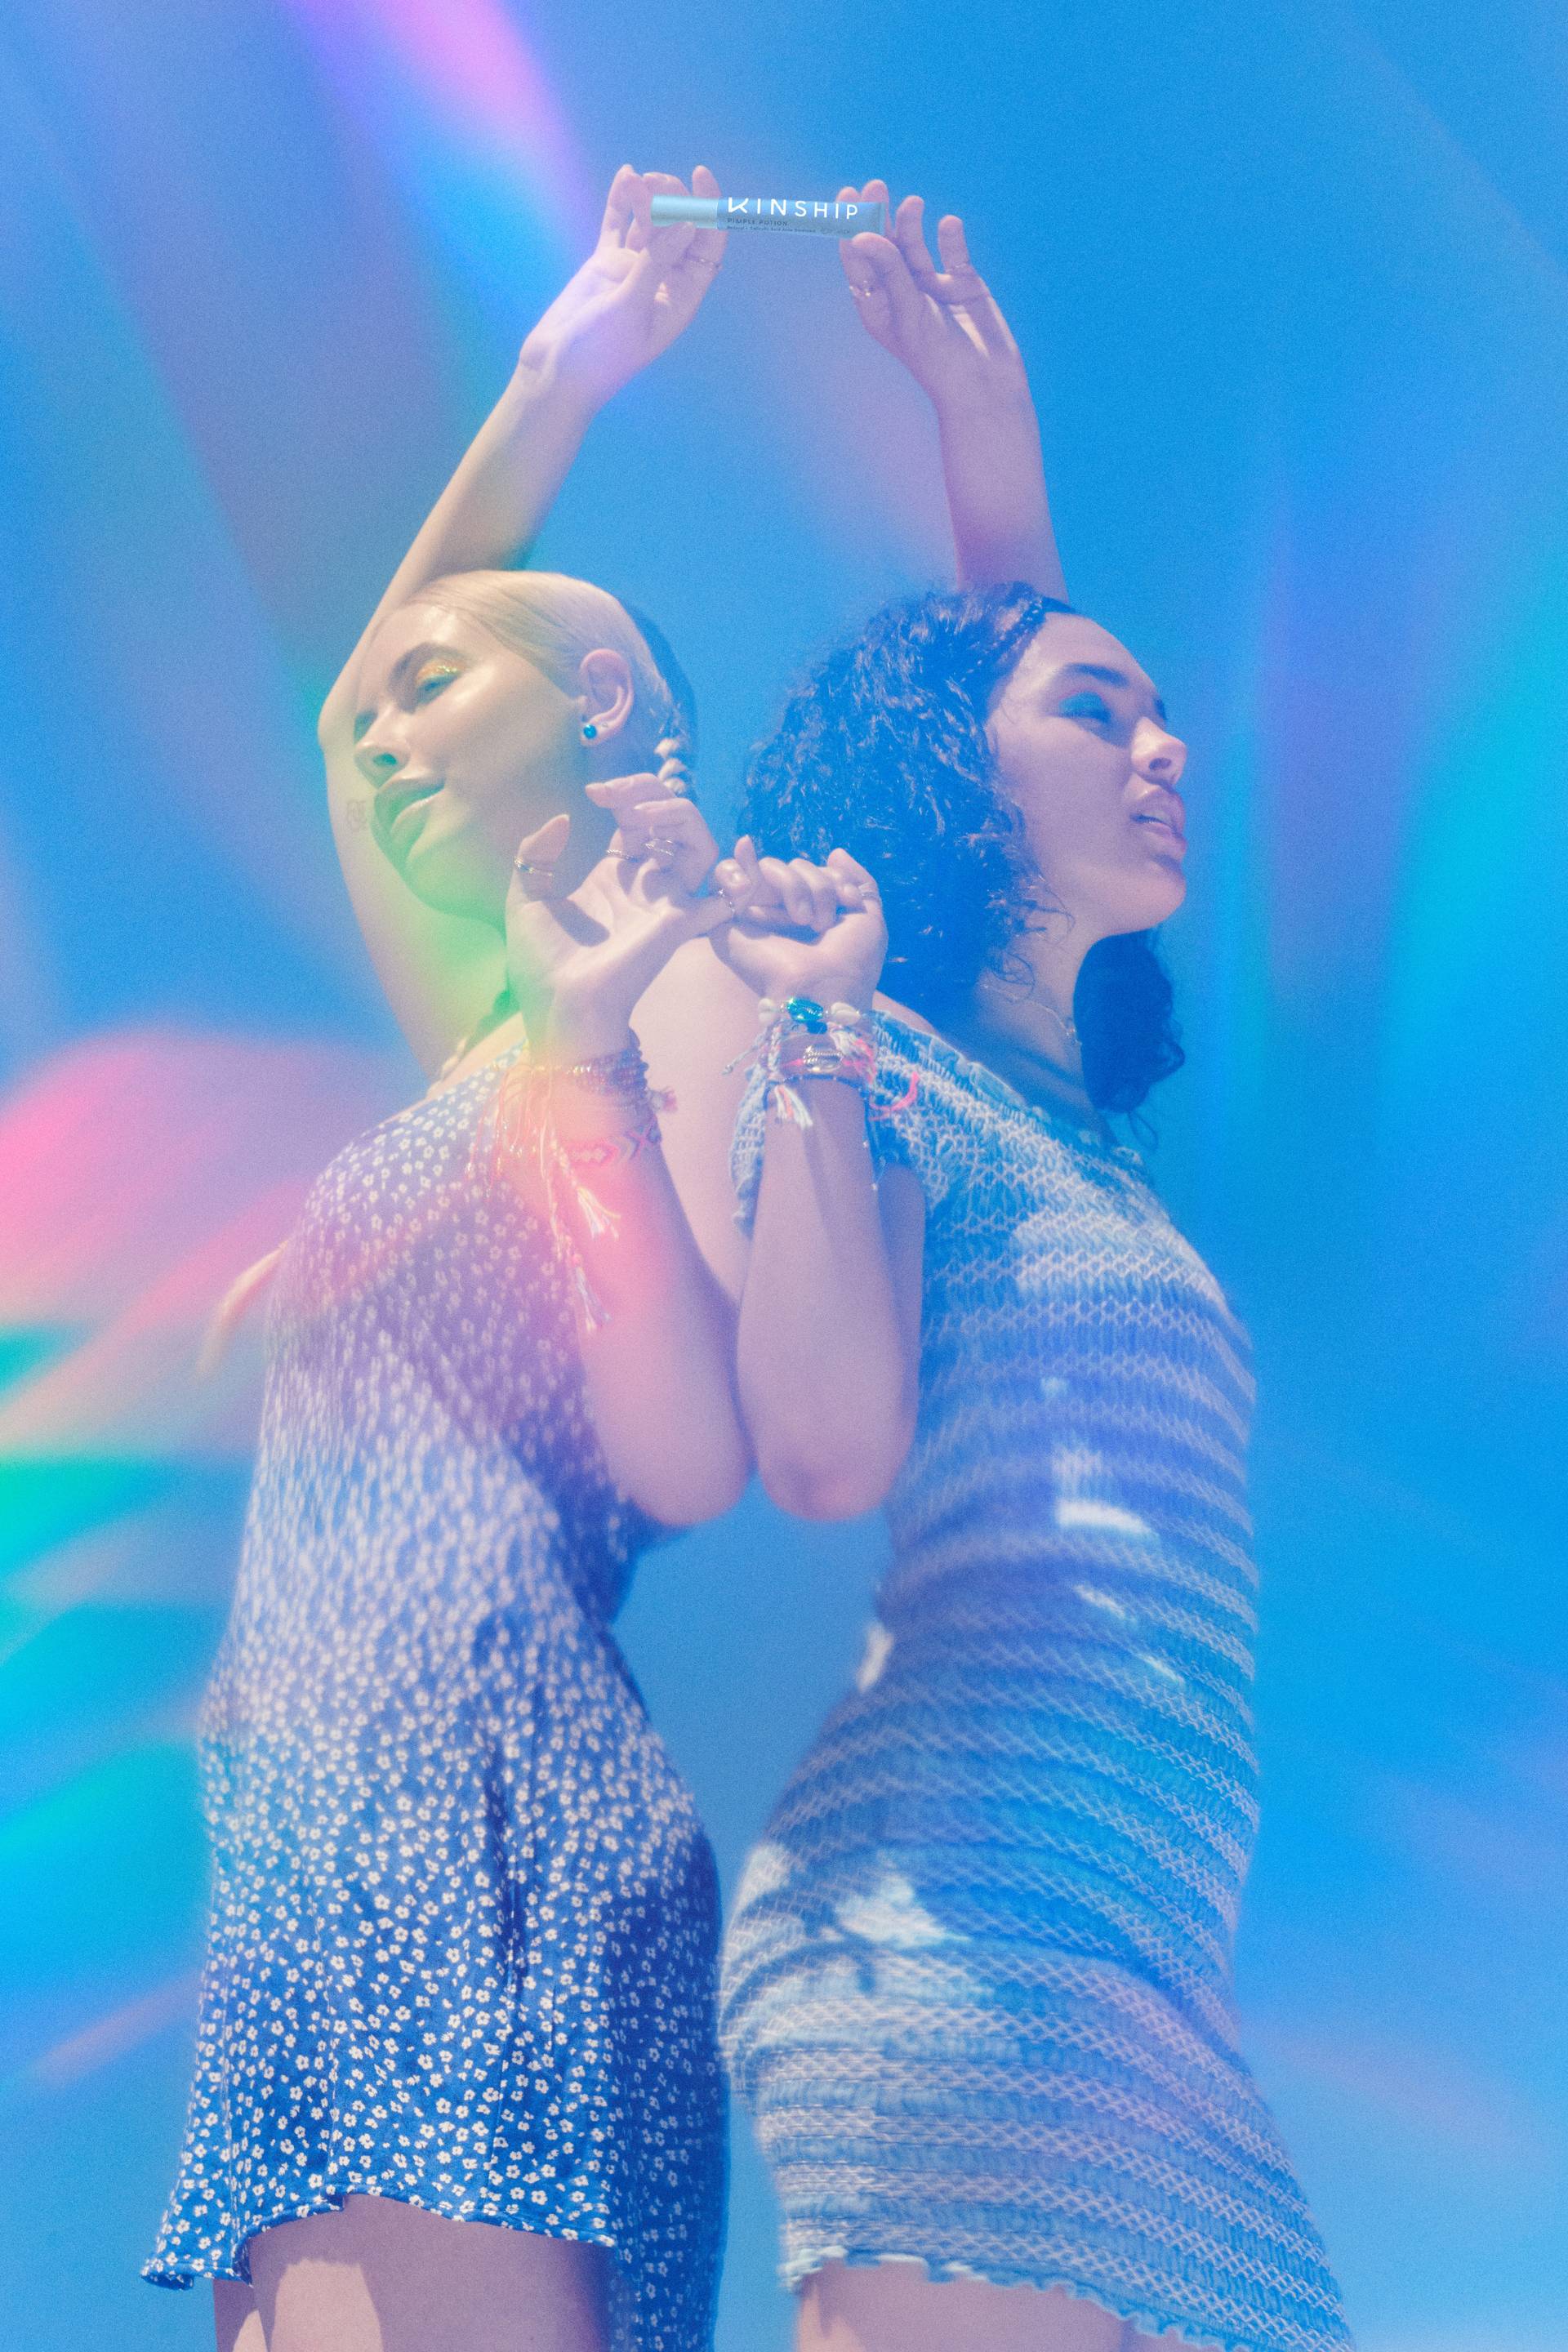 Two friends hold hands outdoors, cast in a rainbow prism of light 